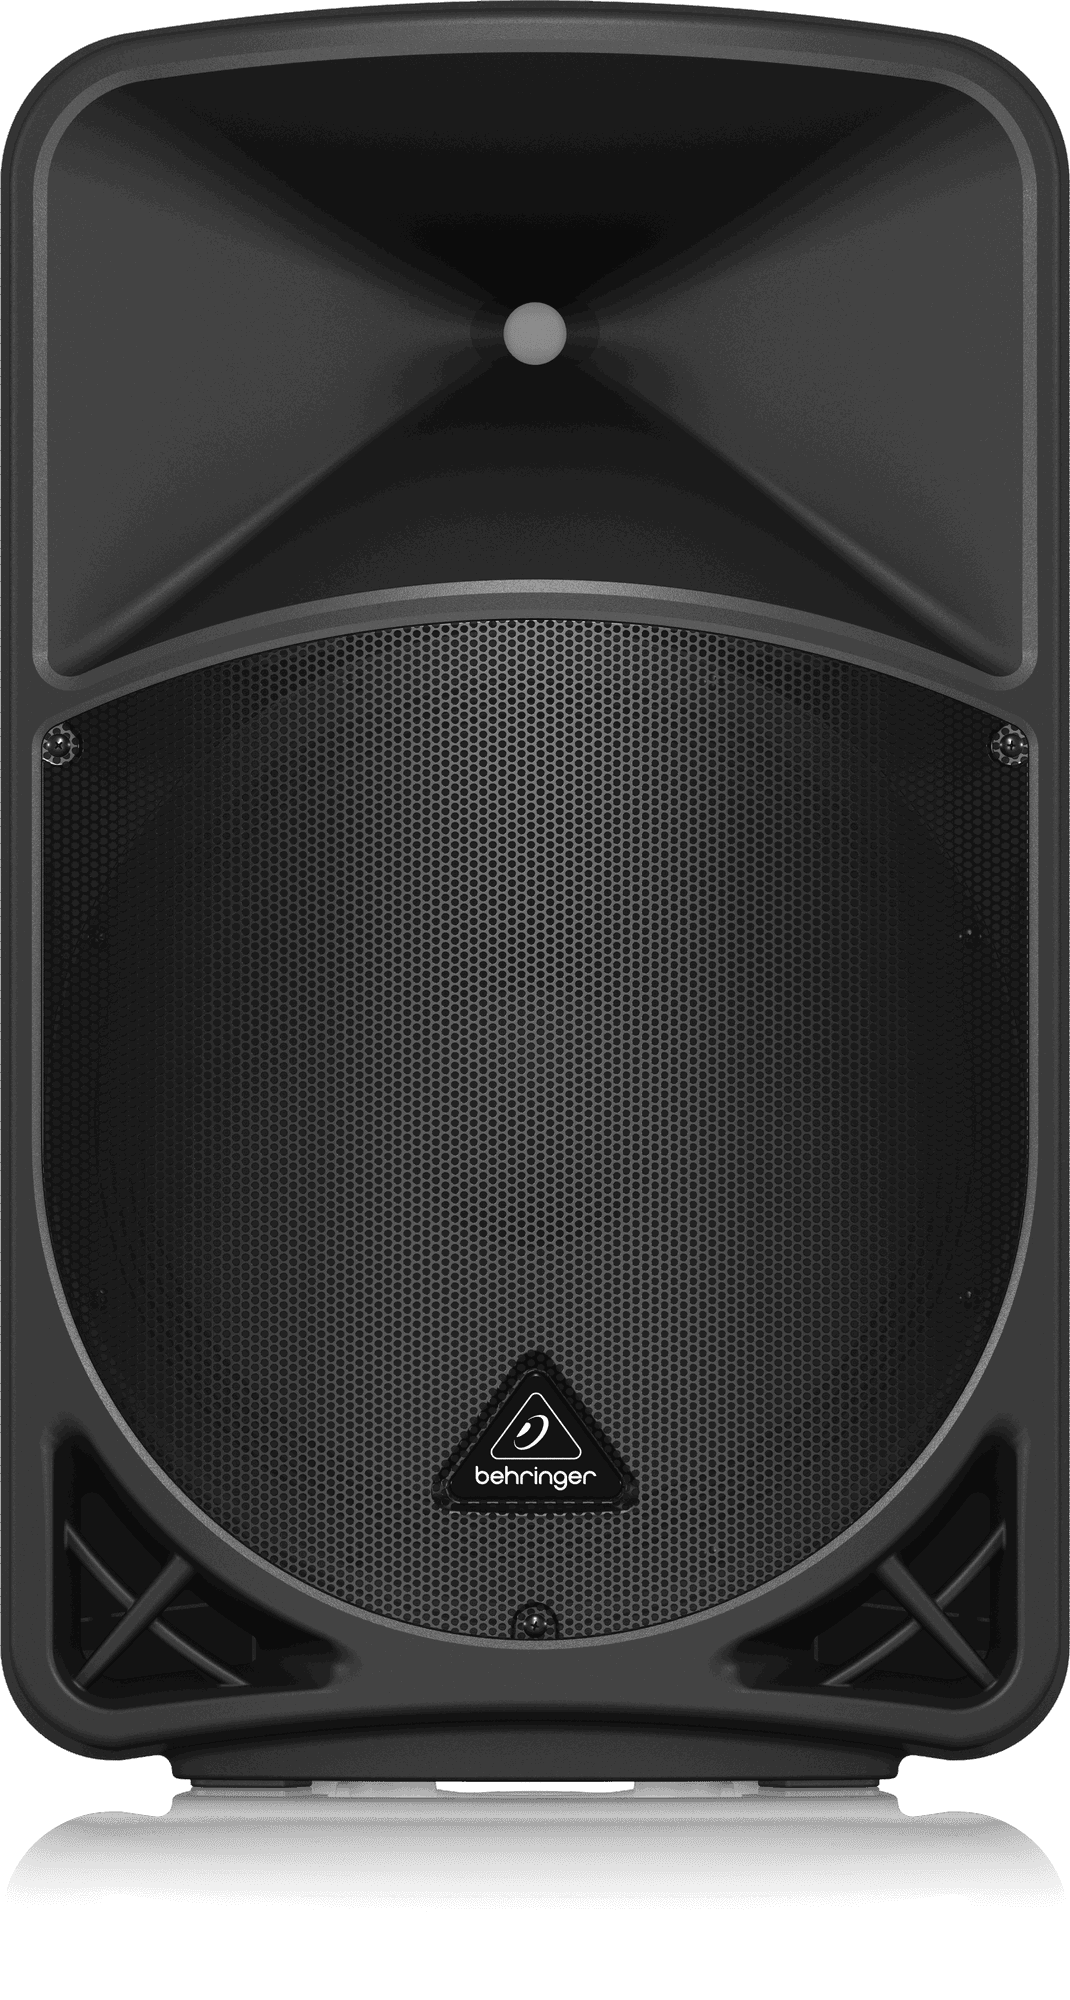 Behringer B15X 1000 Watt 2 Way 15" Powered Loudspeaker with Digital Mixer, Wireless Option, Remote Control via iOS*/Android* Mobile App and Bluetooth Audio Streaming | BEHRINGER , Zoso Music